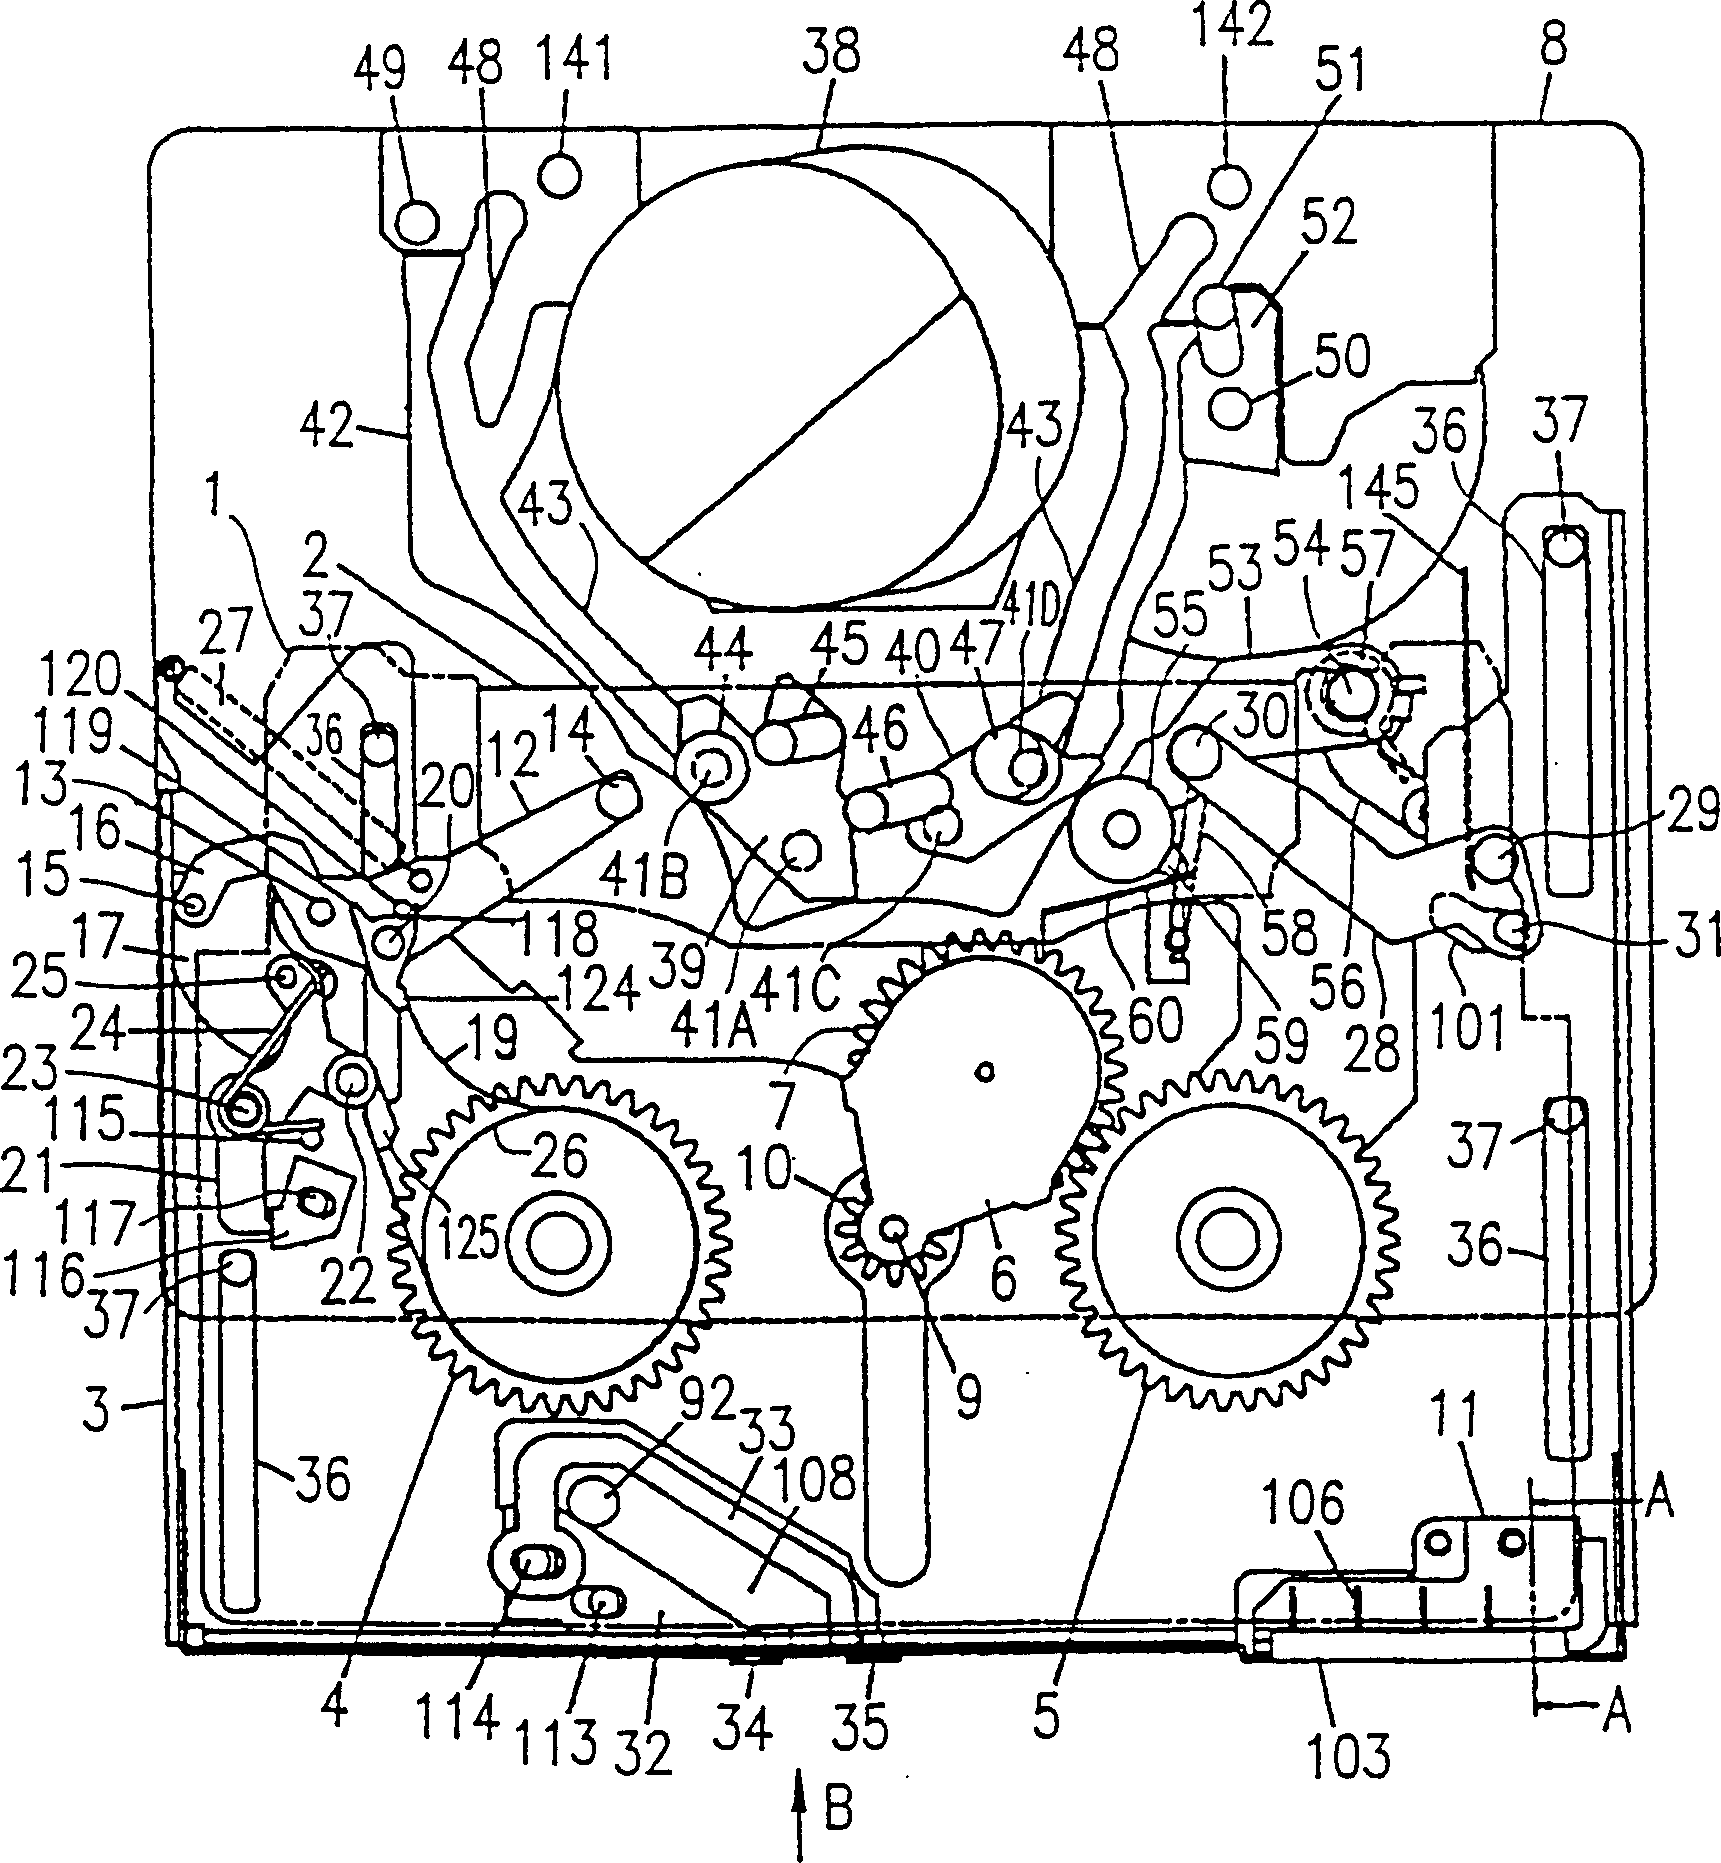 Magnetic recording/reproduction apparatus